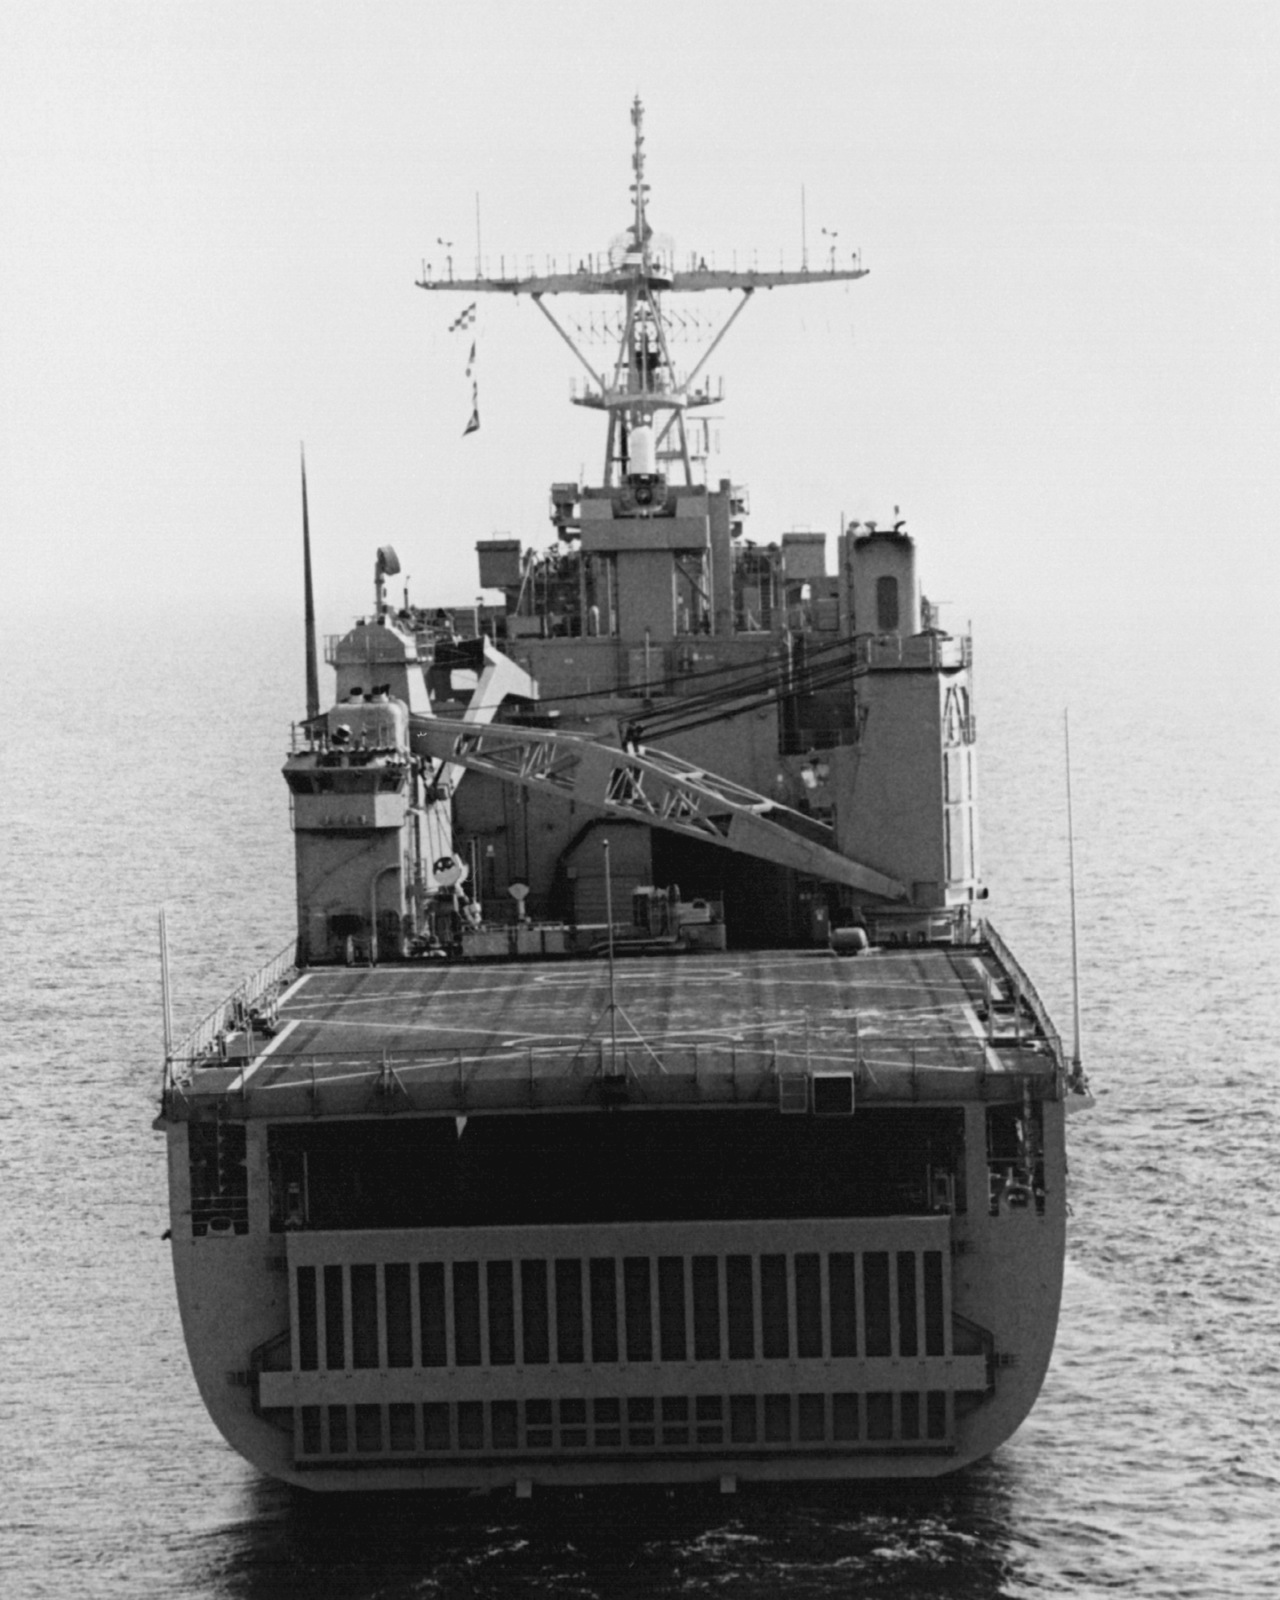 A Stern View Of The Dock Landing Ship Uss Rushmore Lsd 47 Underway U S National Archives Public Domain Image